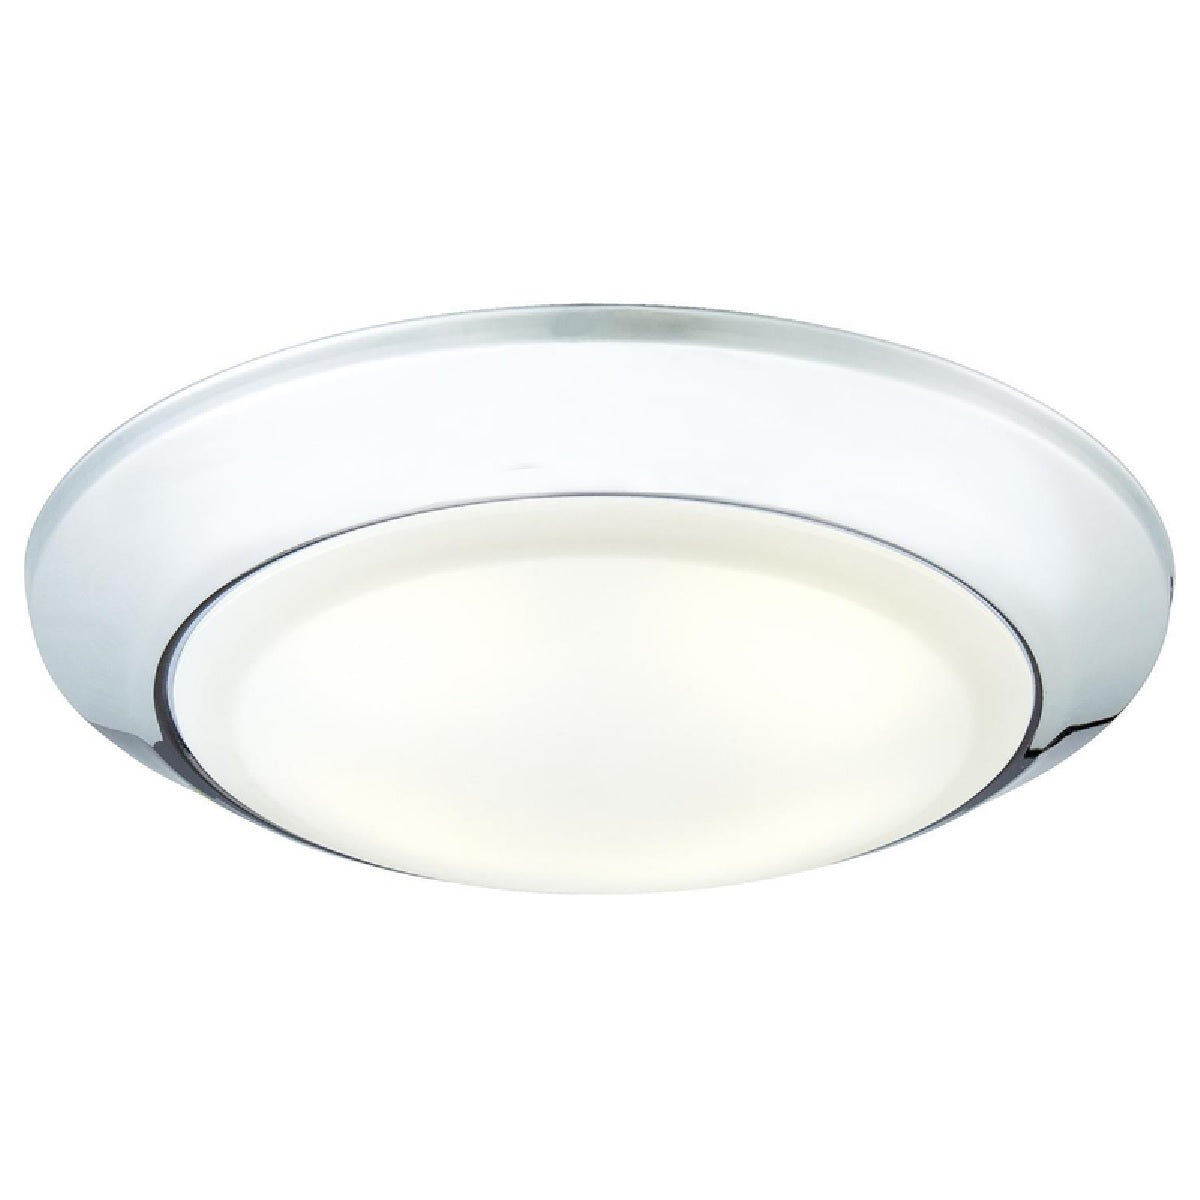 Westinghouse 63226 LED Indoor/Outdoor Dimmable Surface Mount Wet Location, Chrome Finish with Frosted Lens